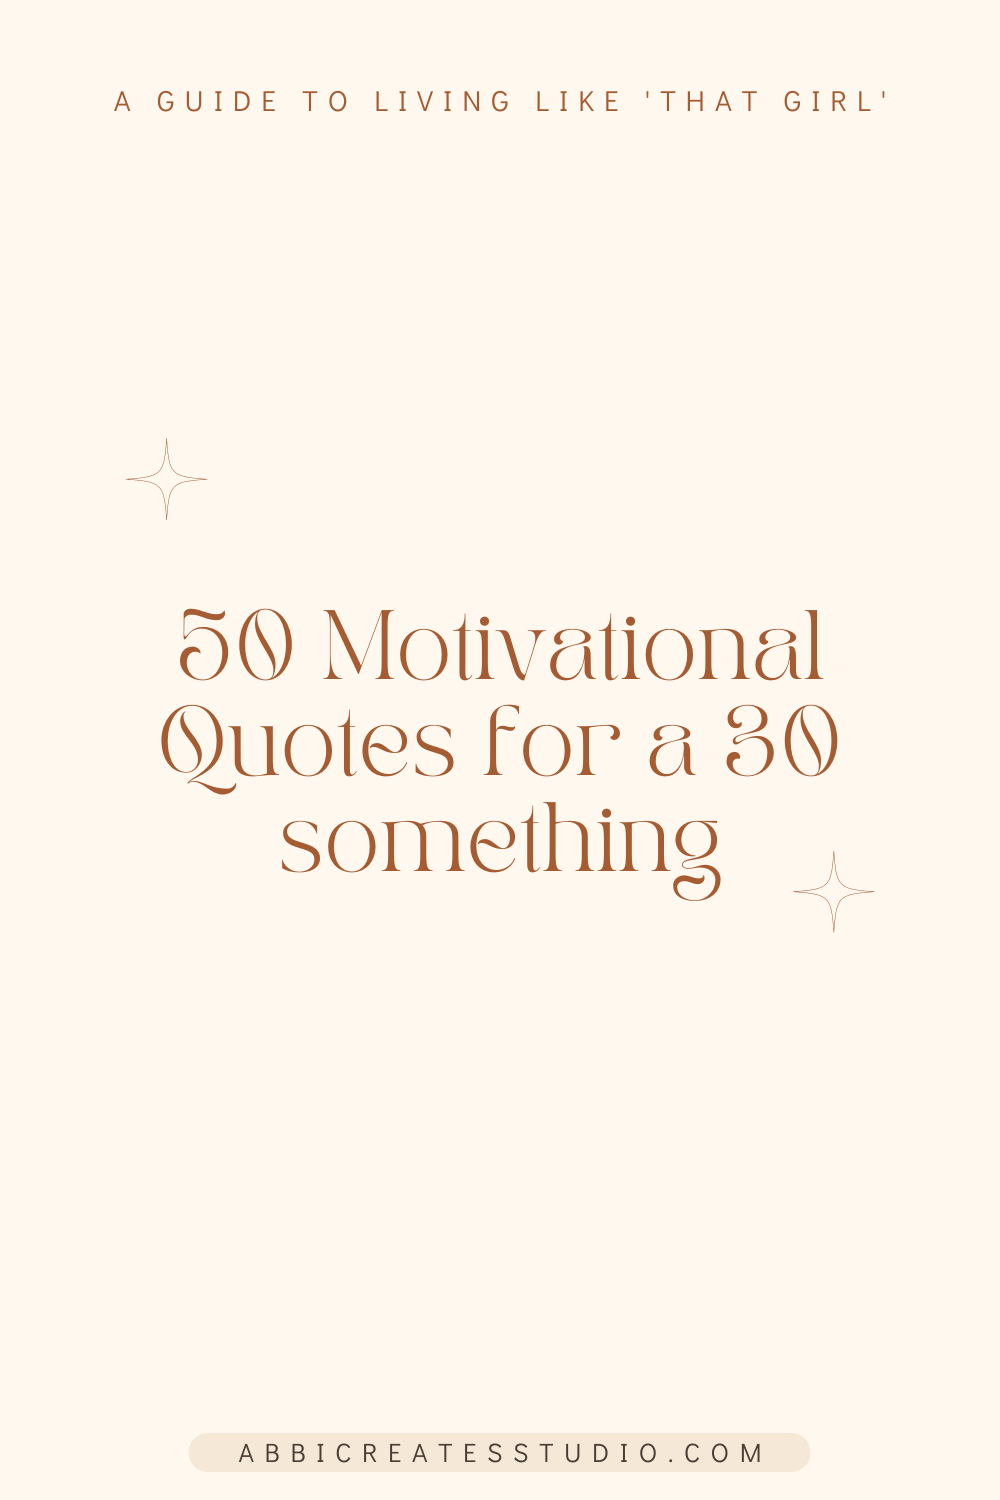 50 Motivational Quotes for a 30 something | A Guide to Living Like 'That Girl' | PART 2